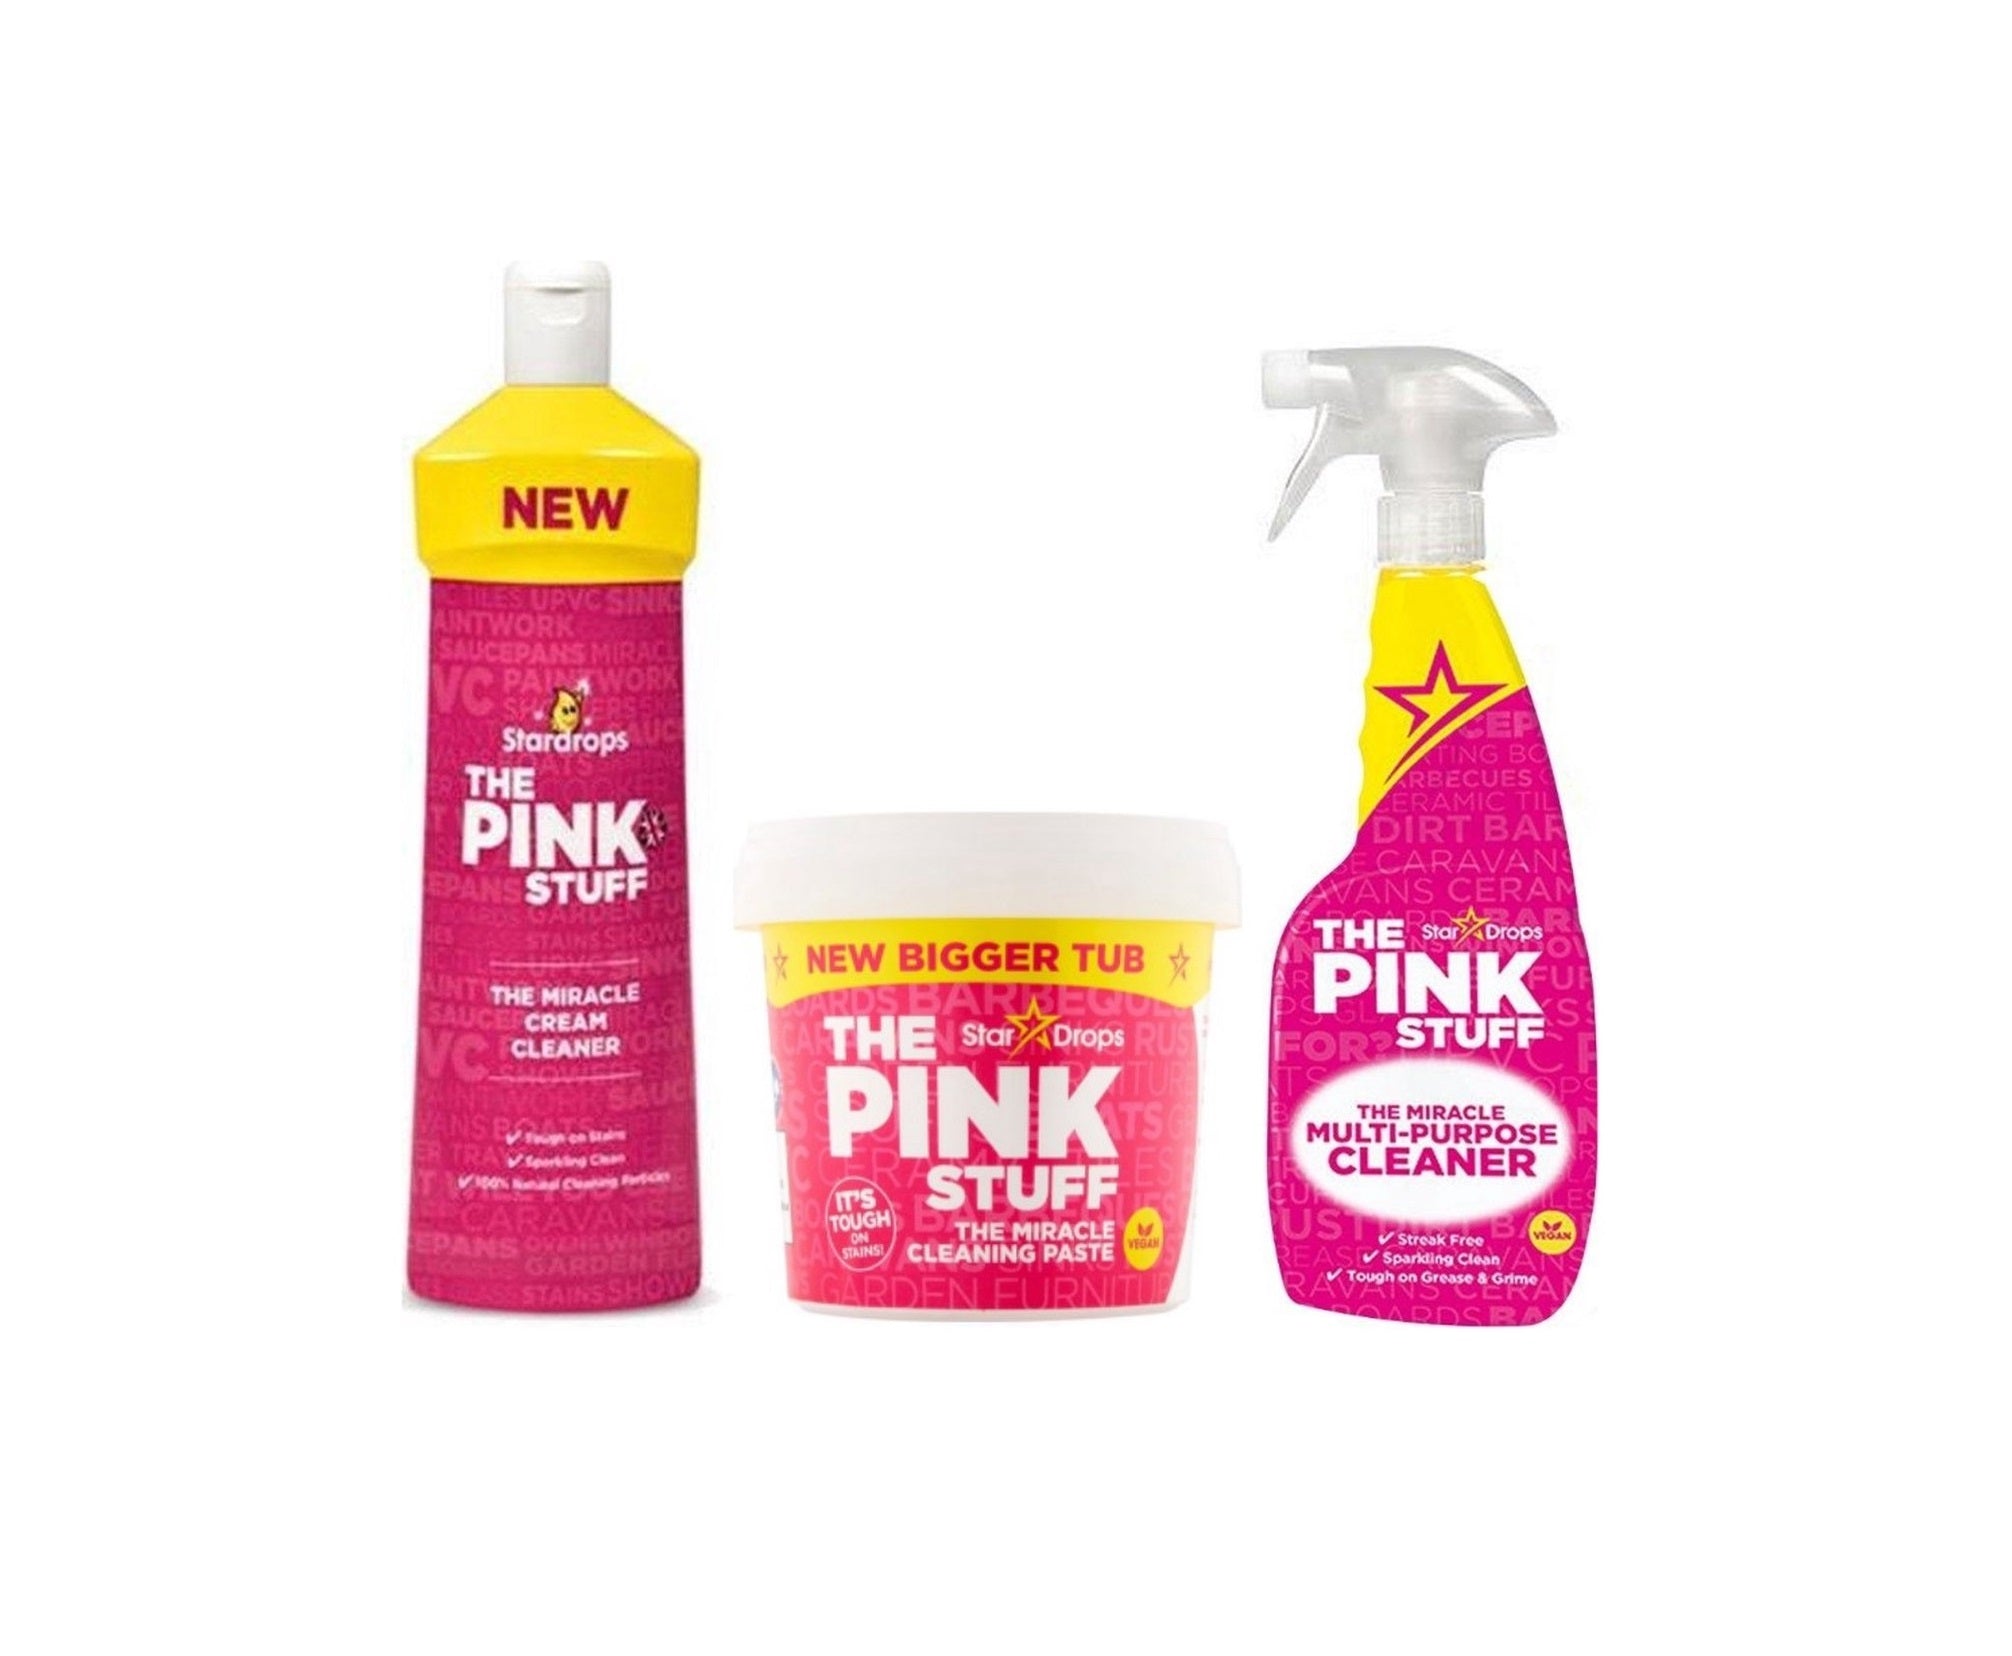 Stardrops - The Pink Stuff - The Miracle Cleaning Paste, Multi